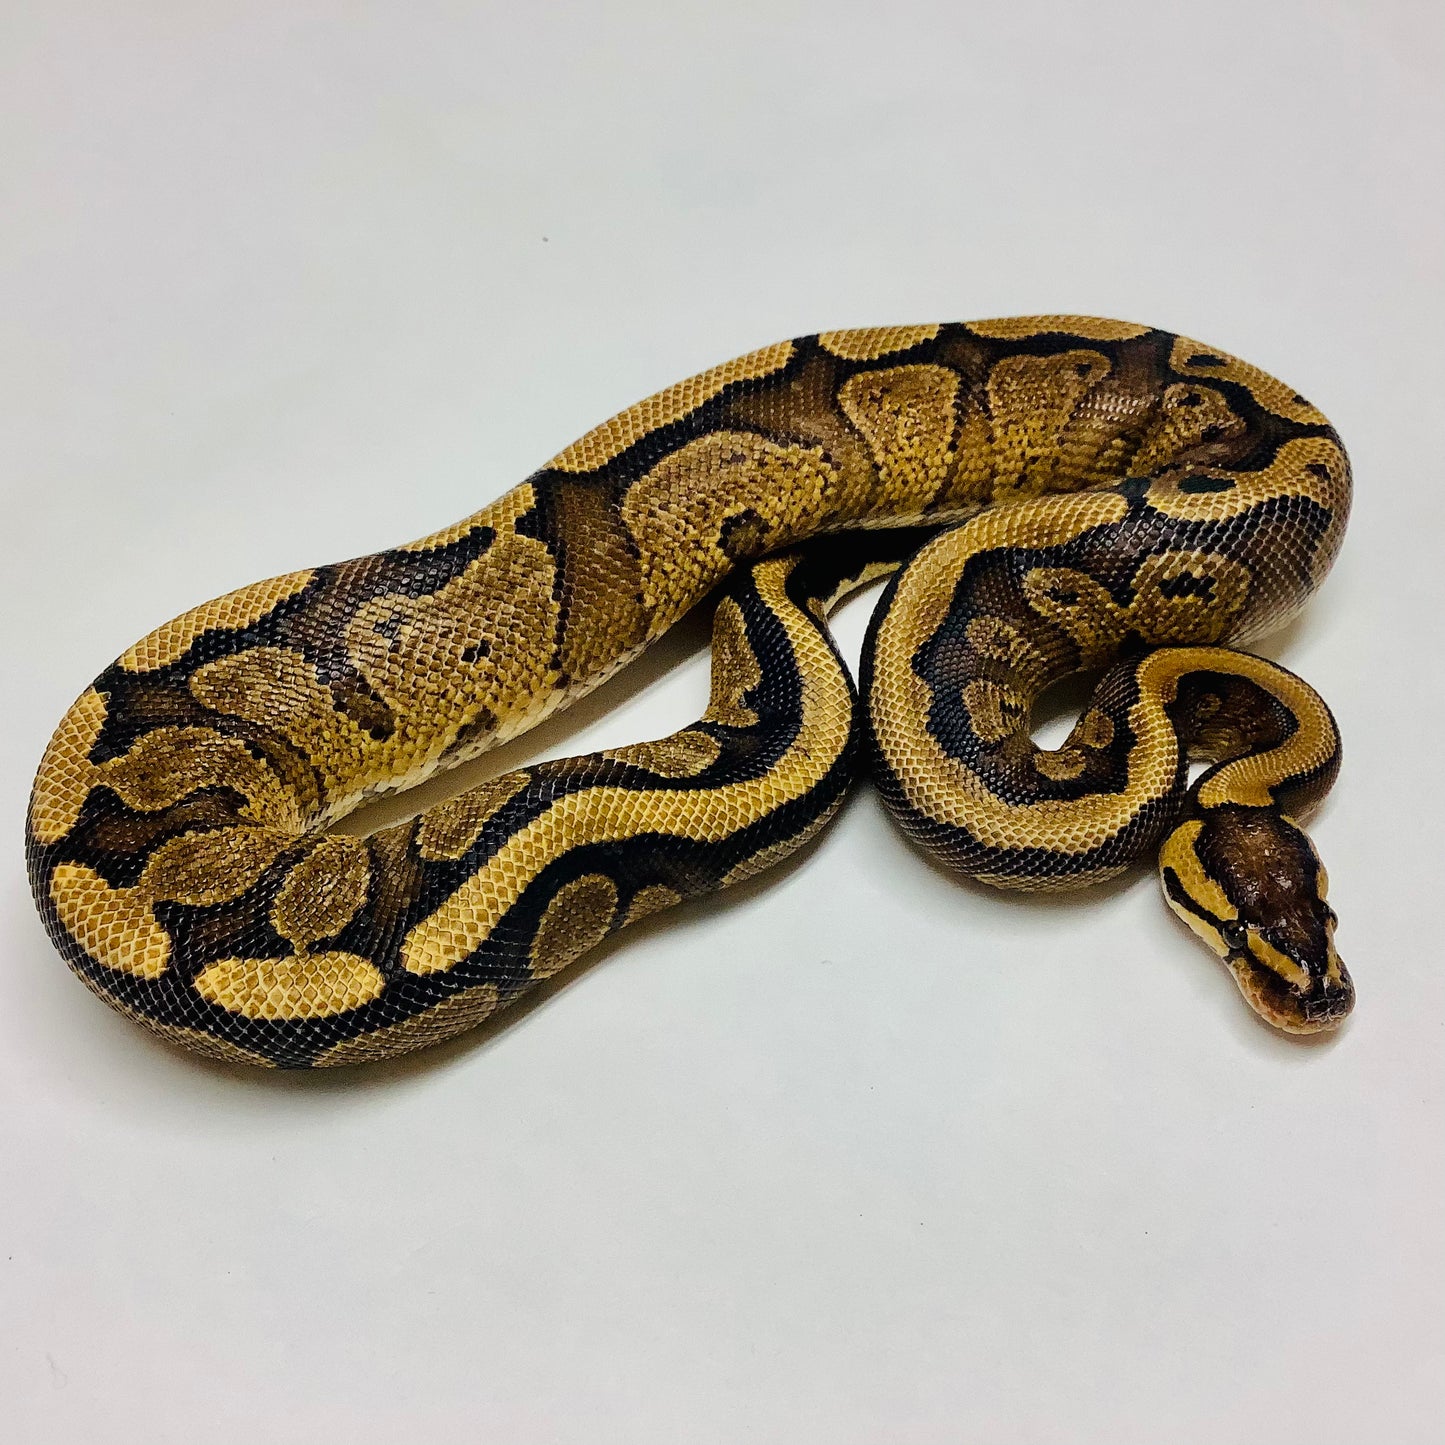 Red Stripe Yellowbelly Ball Python - Male #2021M01-1